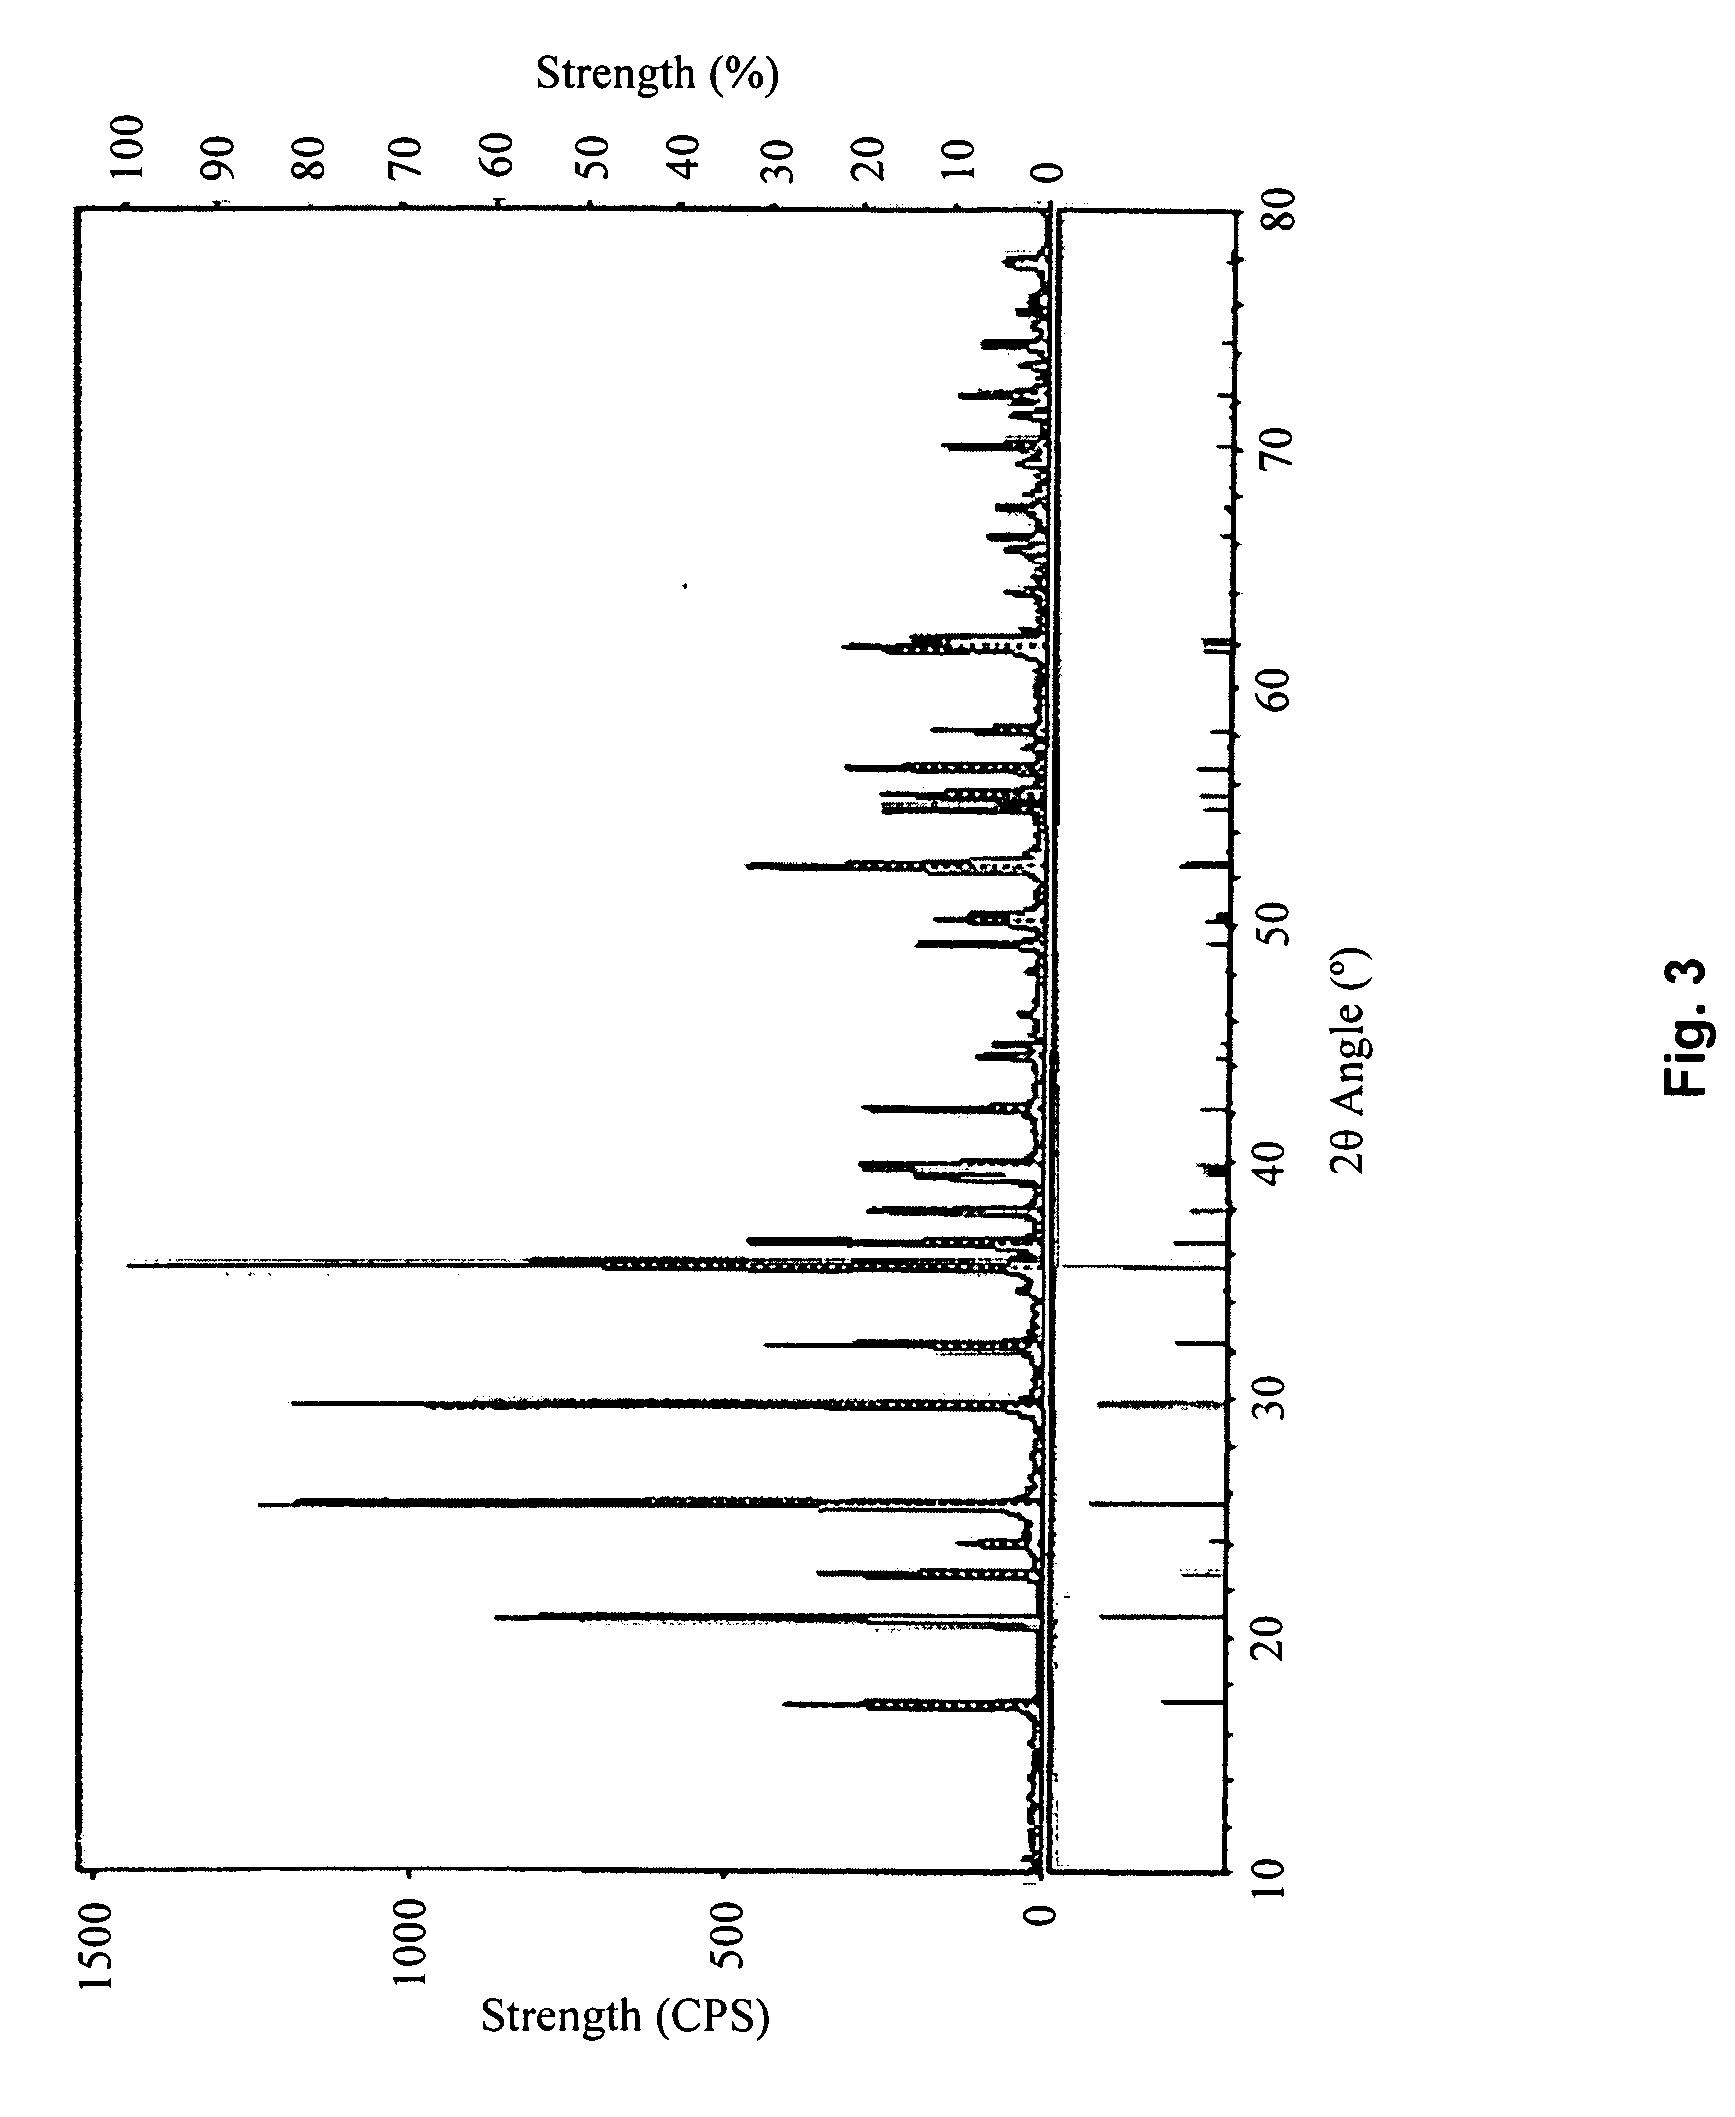 Methods for Synthesizing Lithium Iron Phosphate as a Material for the Cathode of Lithium Batteries